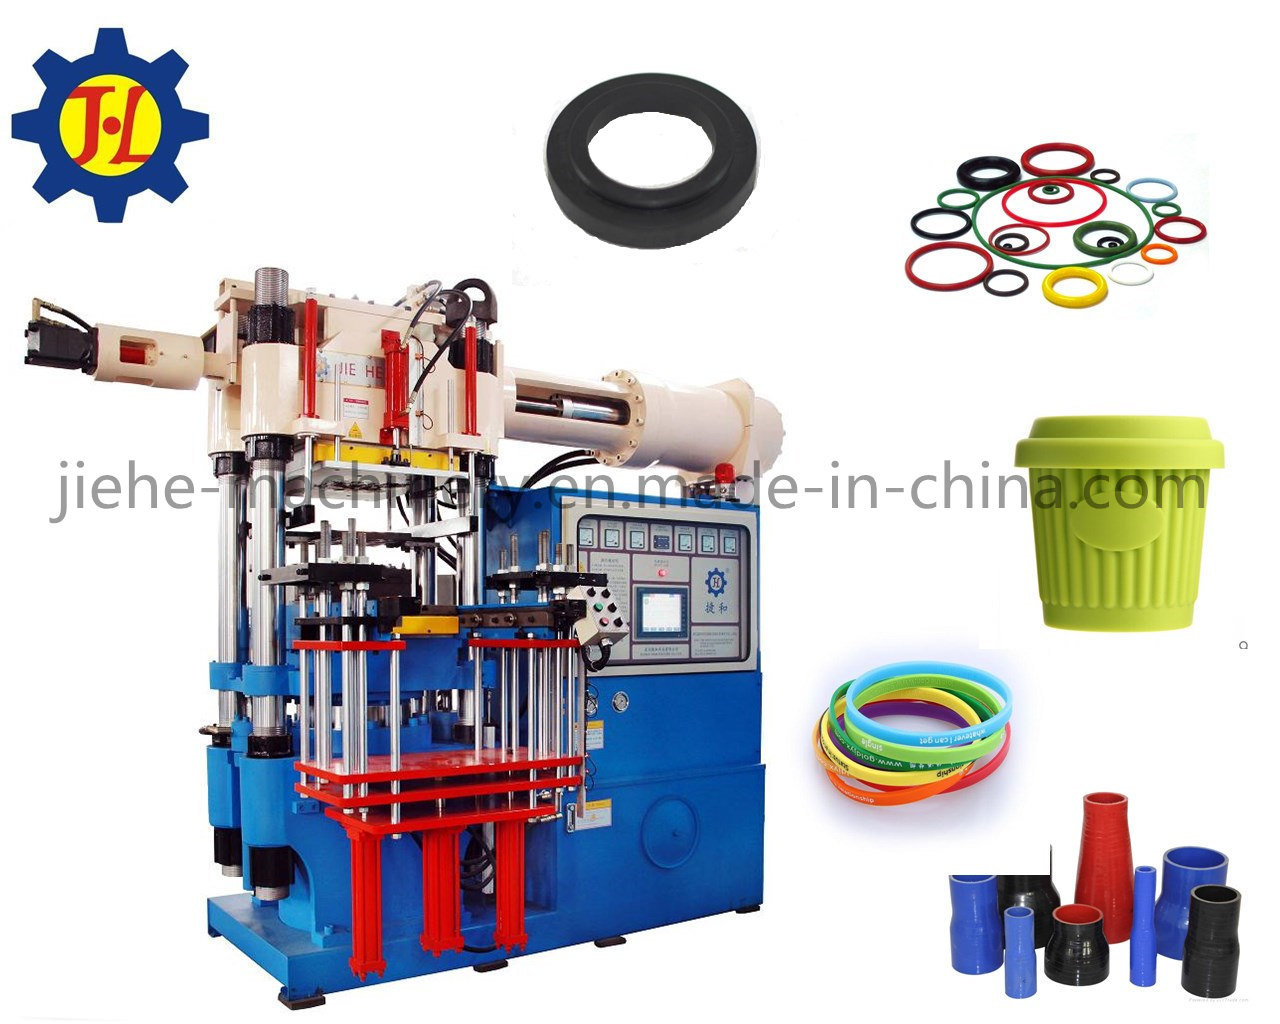 Rubber Injection Moulding Press for Silicone and Rubber Products